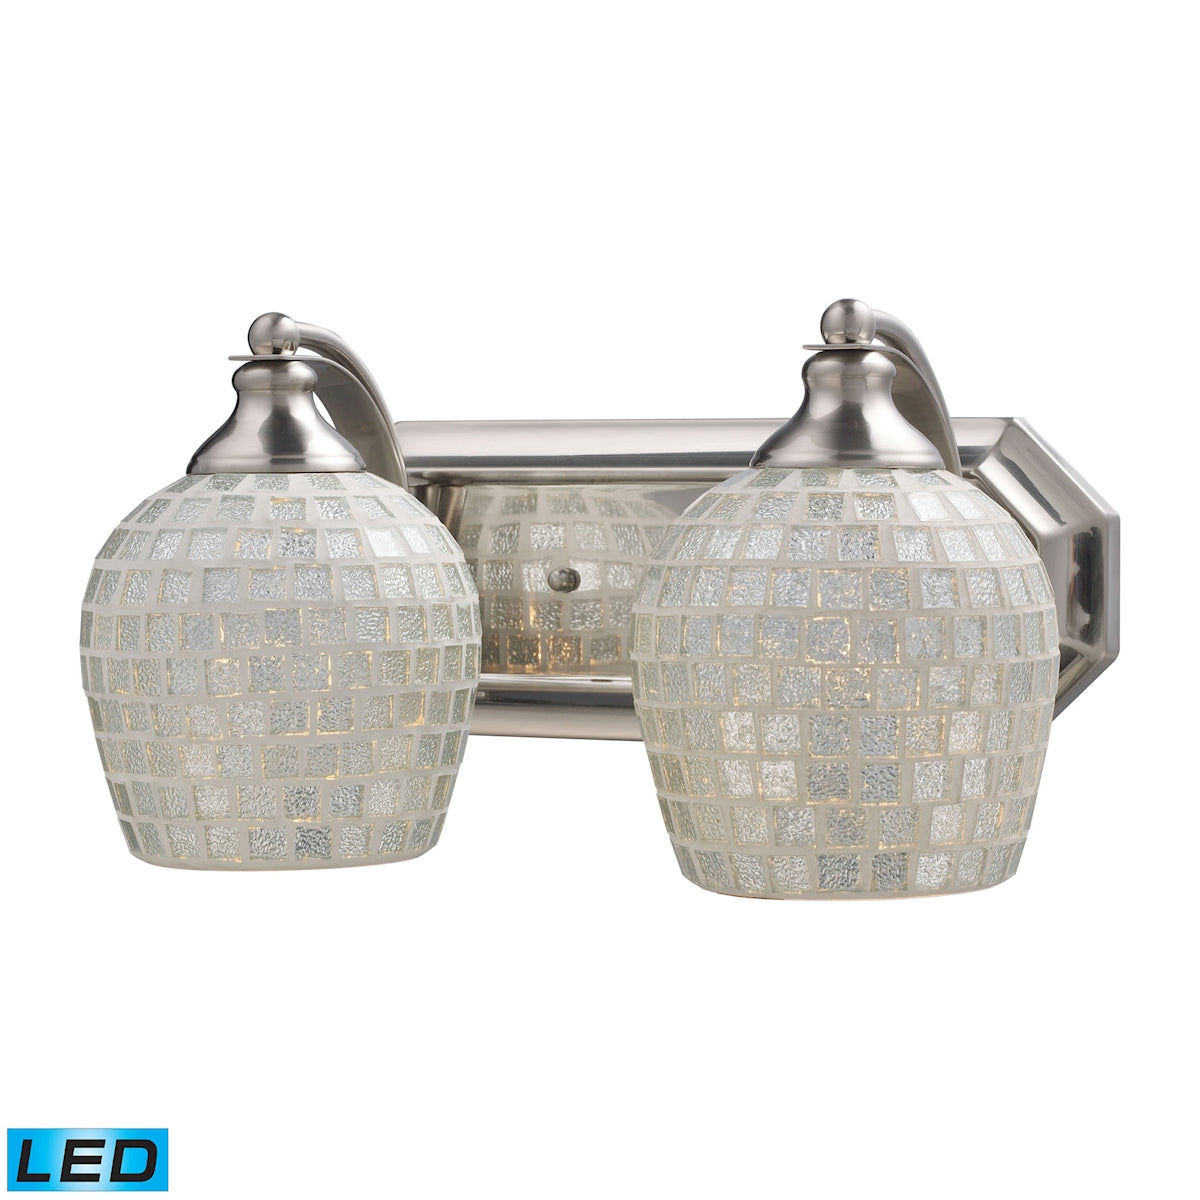 ELK Lighting 570-2N-SLV-LED Mix-N-Match Vanity 2-Light Wall Lamp in Satin Nickel with Silver Glass - Includes LED Bulbs